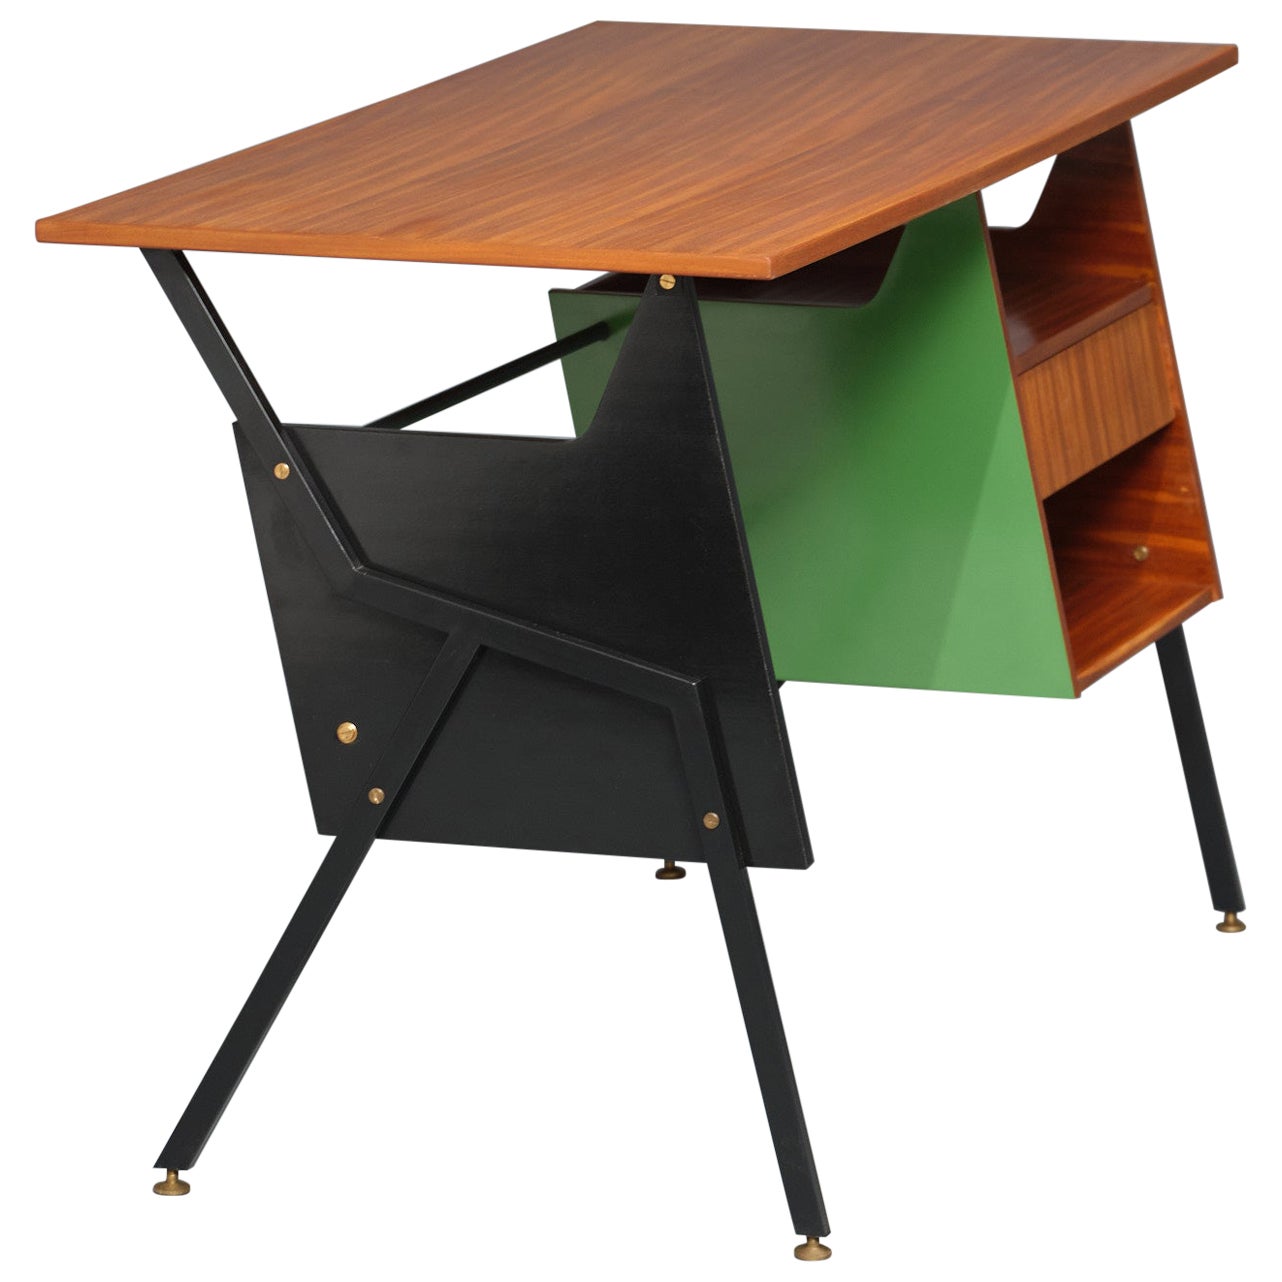 1950s Italian Writing Desk with Sophisticated Design and Restyled by RETRO4M